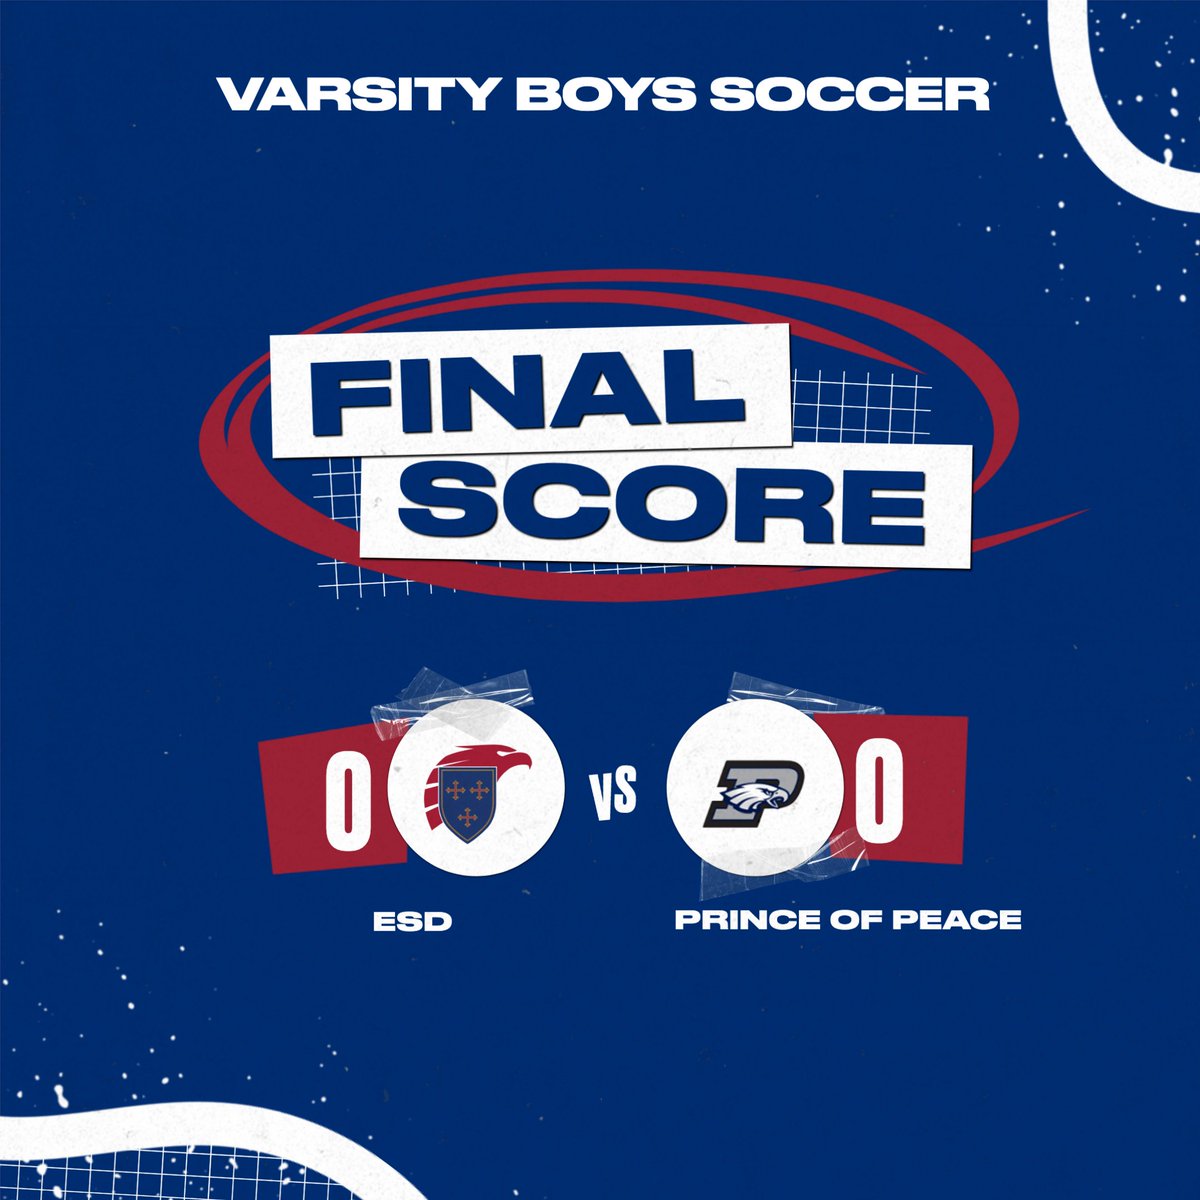 Another tie for boys soccer tonight! ⚽️